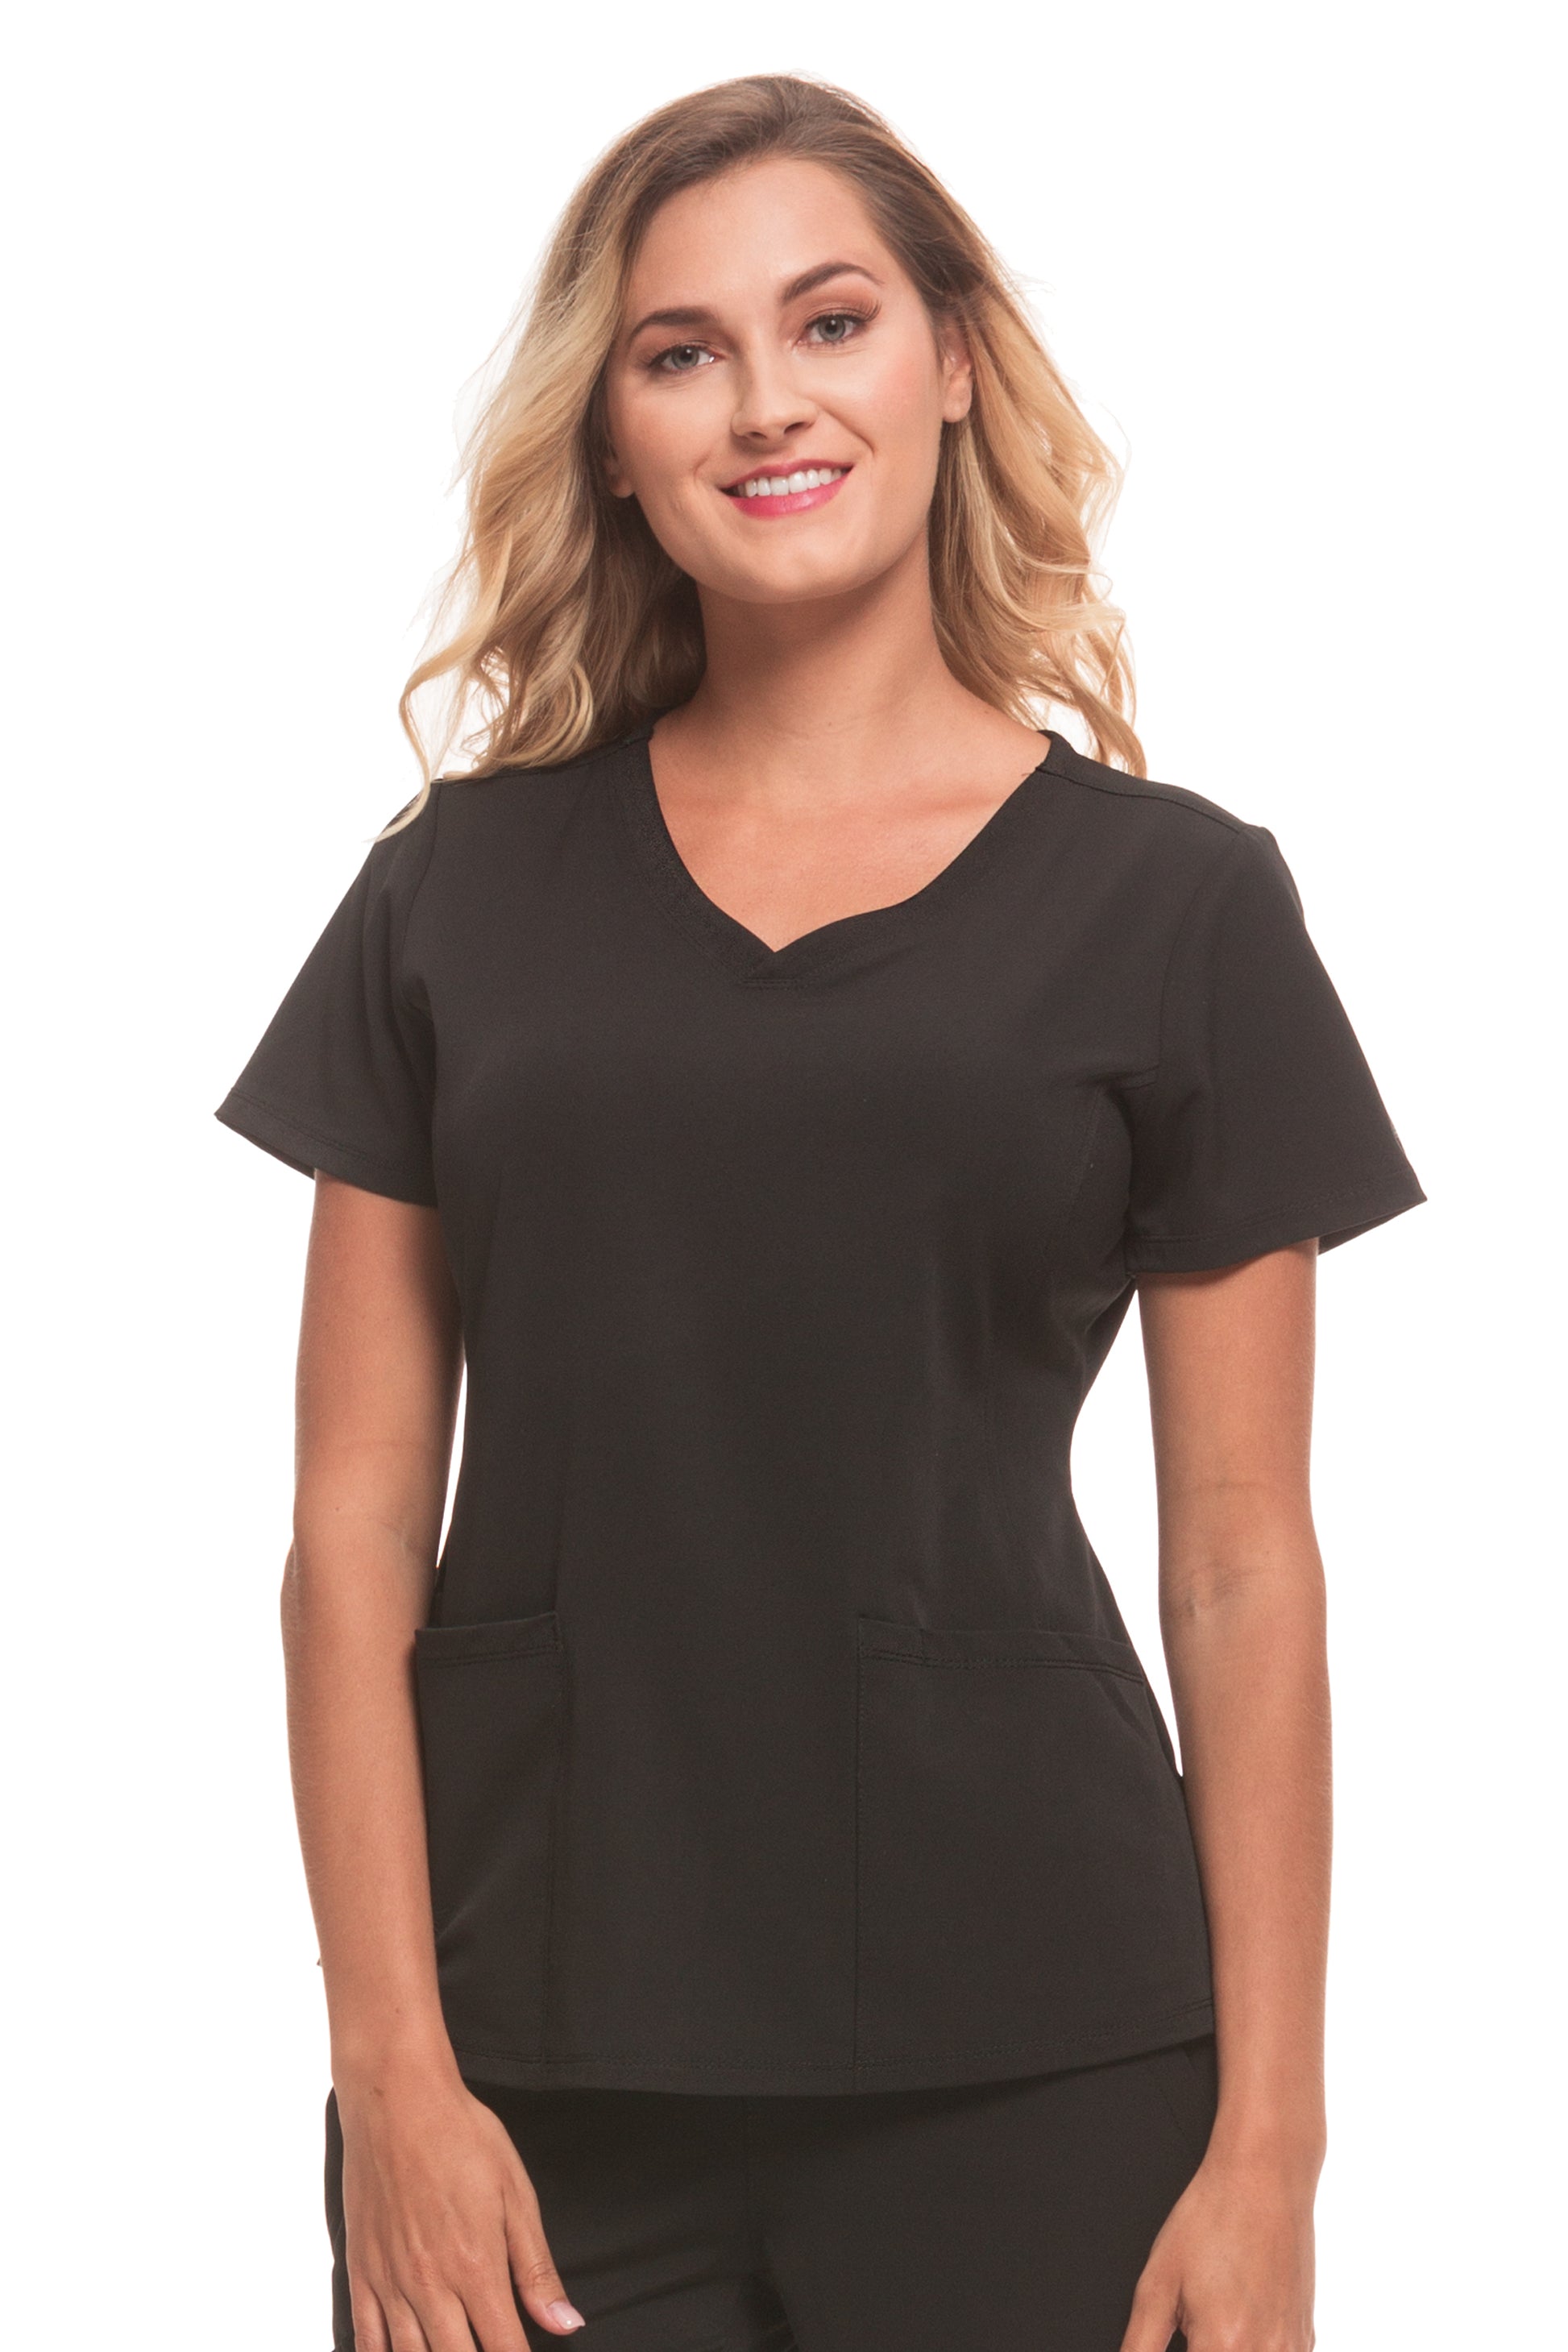 Heal Wear Heal + Wear Women Scrubs Top V-Neck Short Sleeve Female Medical with Pockets Regular Fit 4 Way Stretch Wine S, Adult Unisex, Size: Small